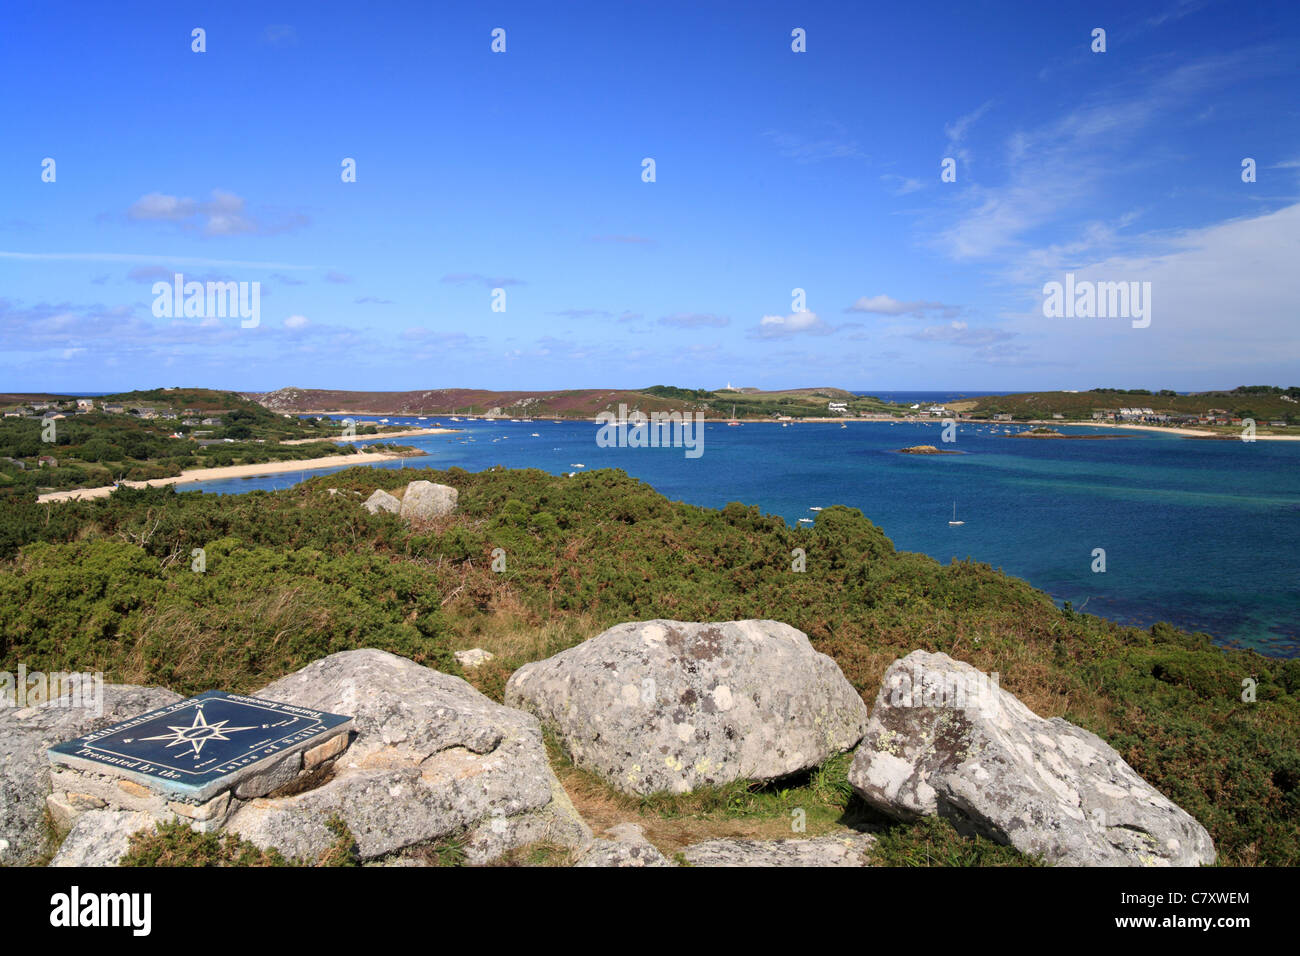 Samson Hill, Bryher, looking across the turquoise sea towards Tresco, Isles of Scilly, Cornwall. Stock Photo